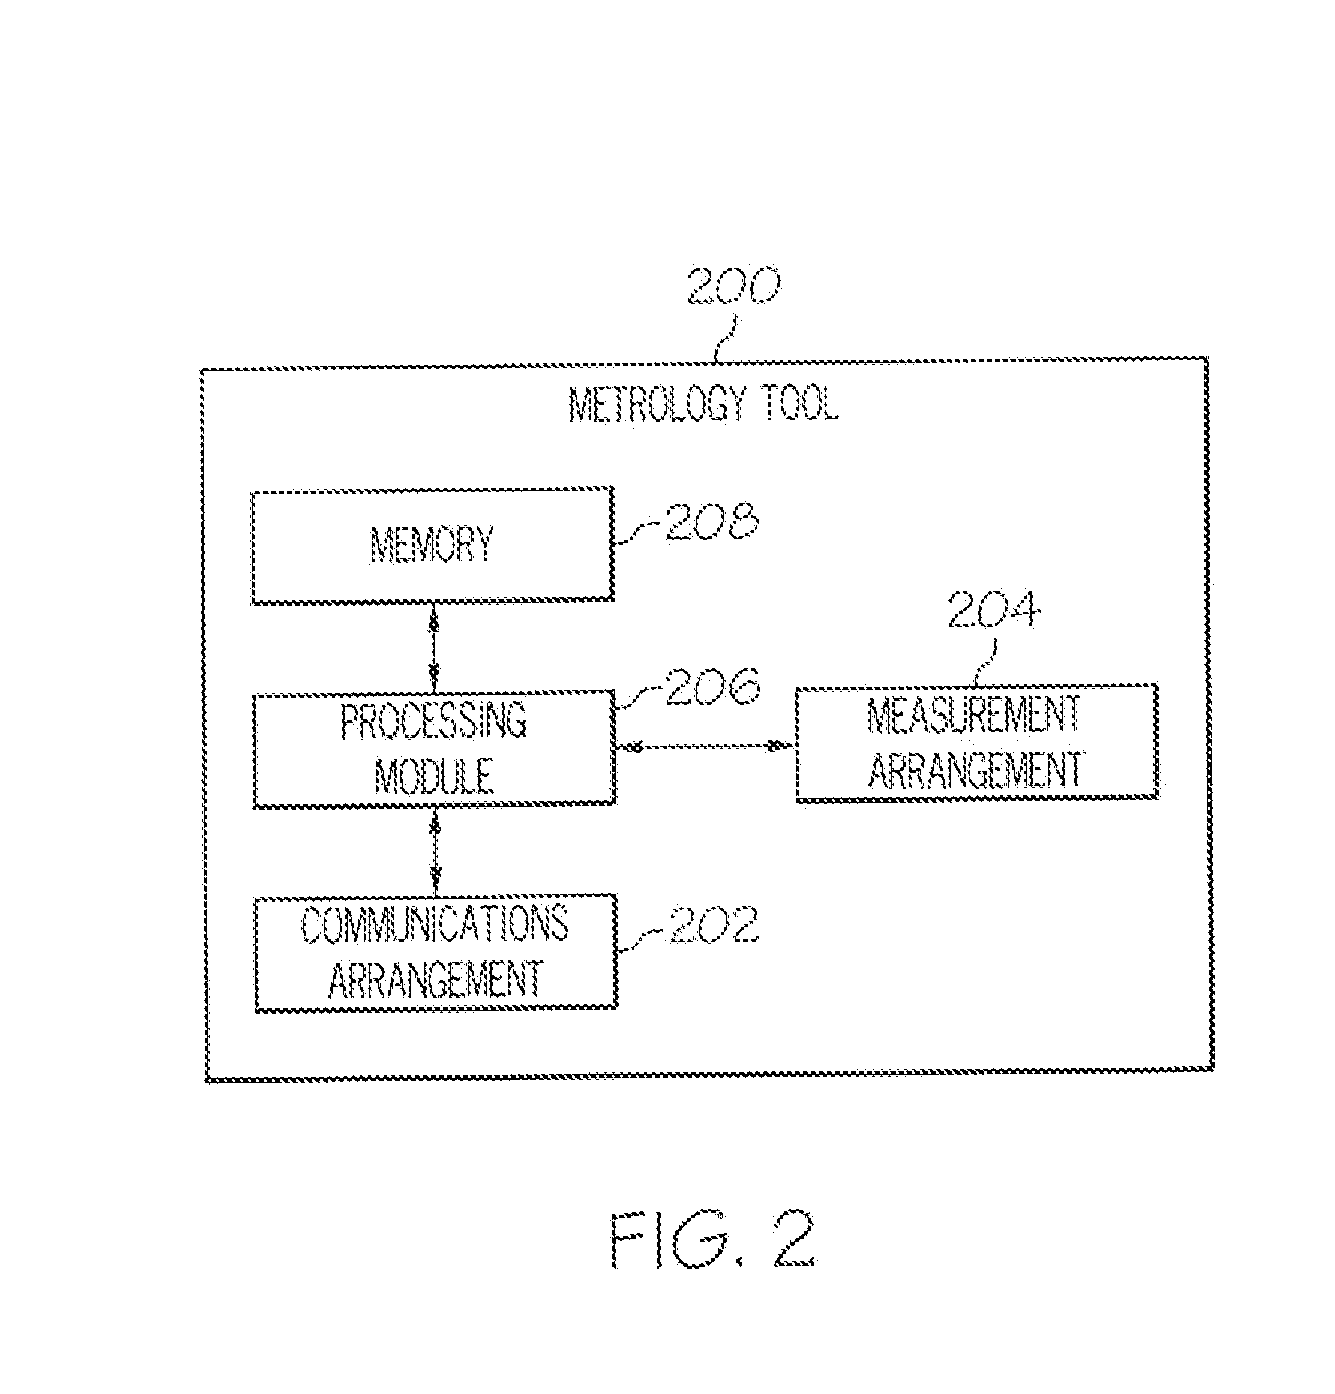 Automated hybrid metrology for semiconductor device fabrication